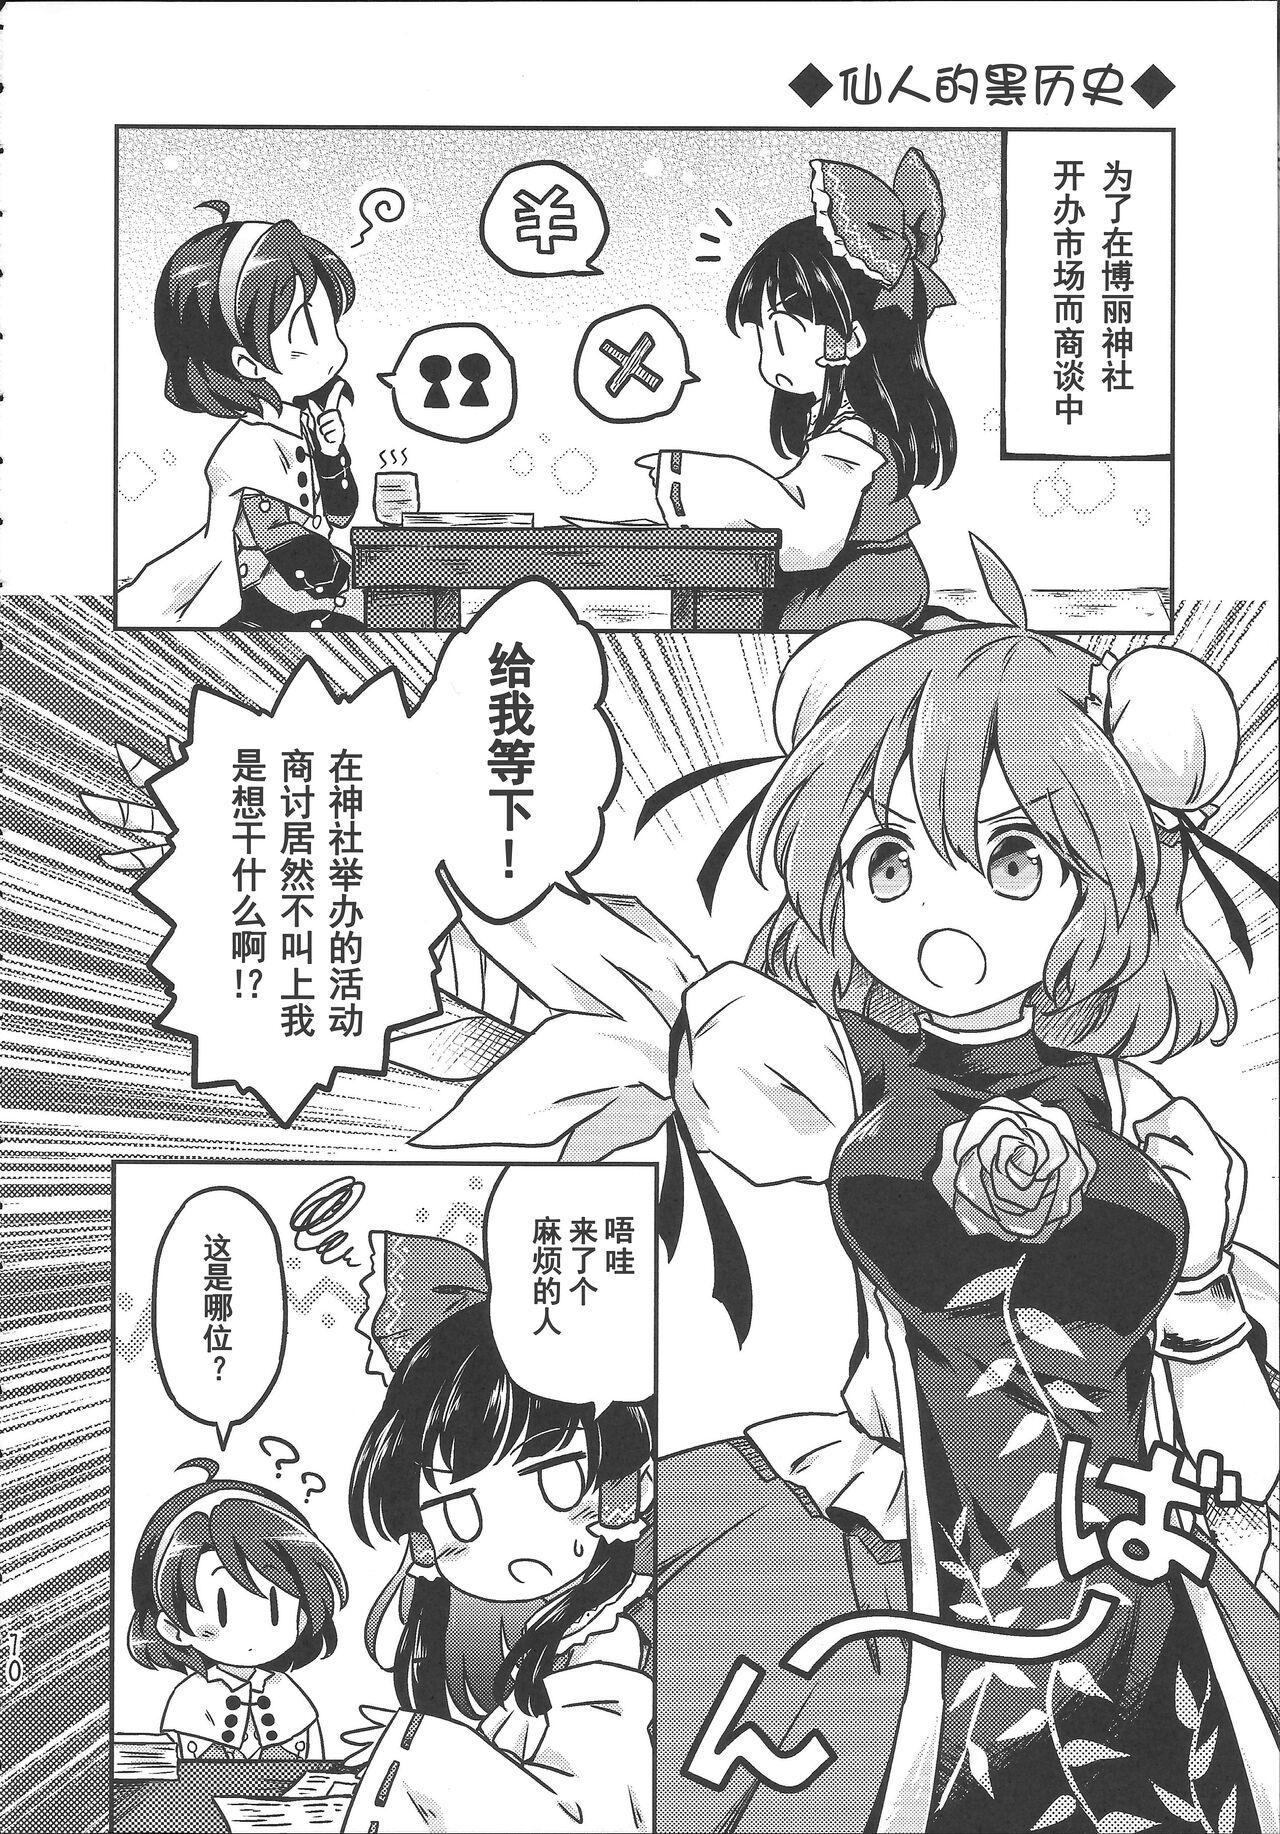 Whatsapp 《千亦酱的活动日志》 - Touhou project Sologirl - Page 10